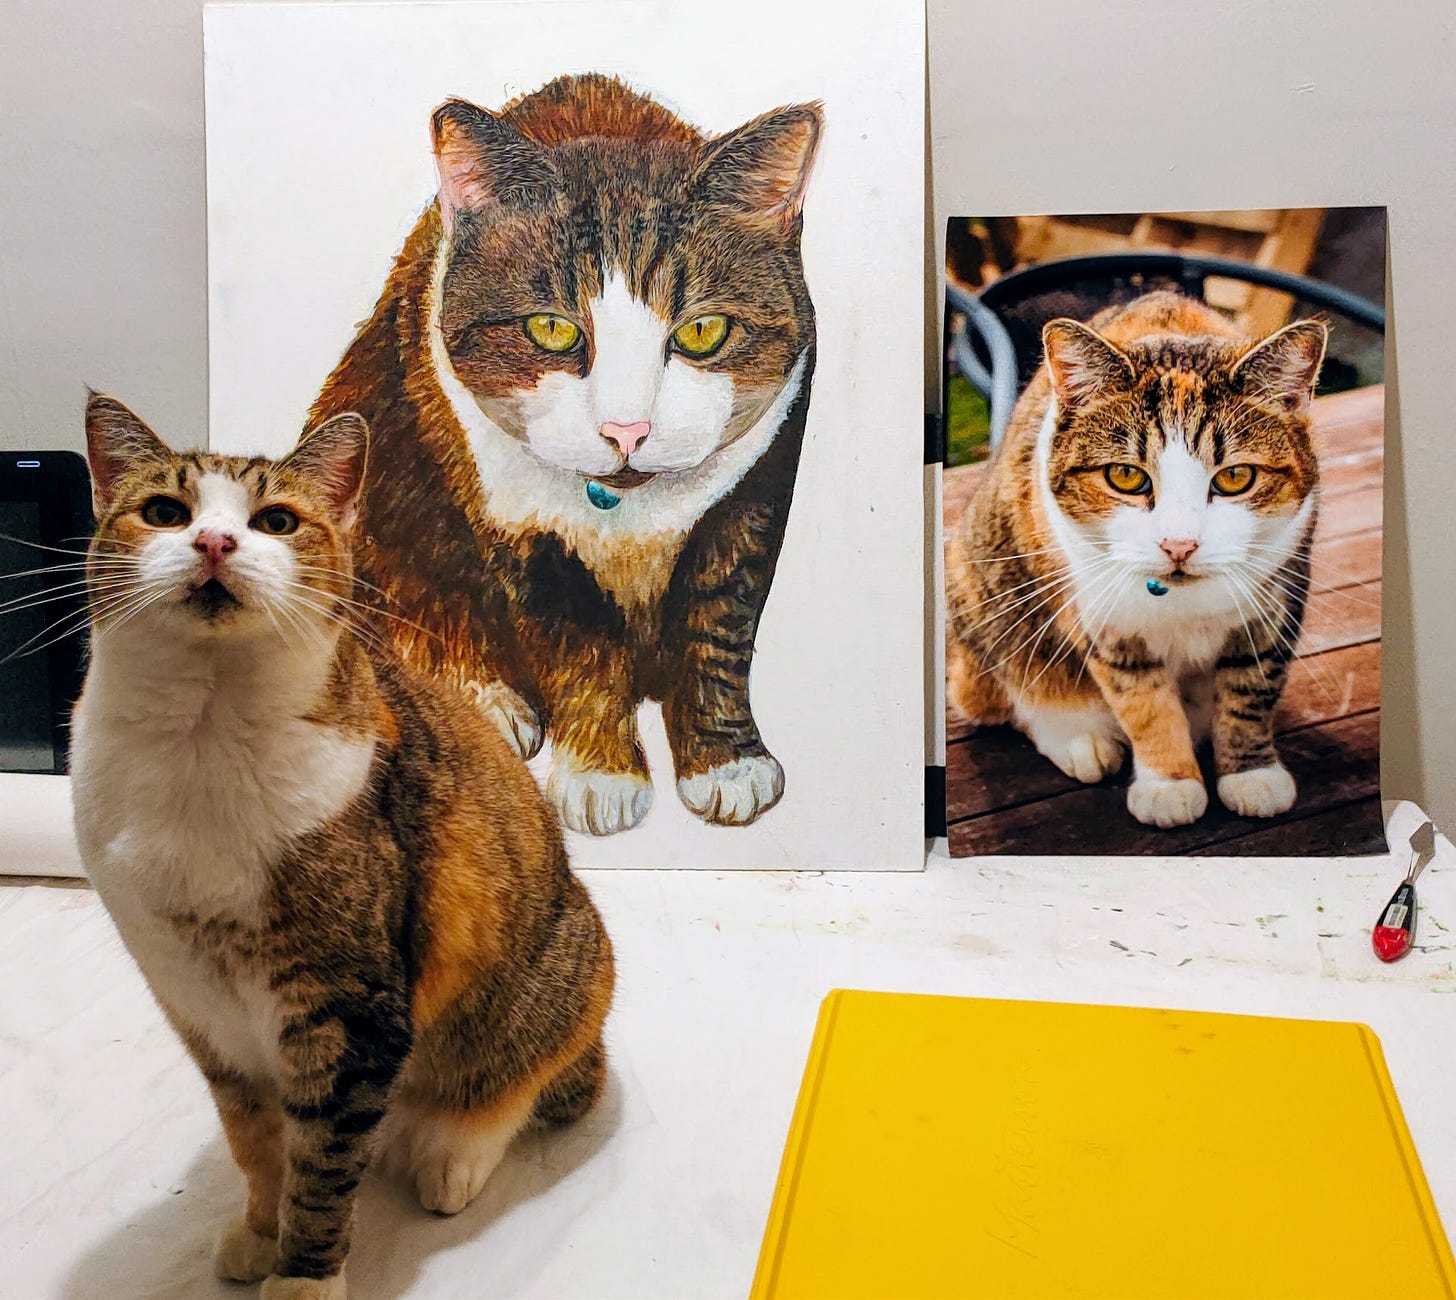 Pictured is a calico cat, a photo of the same cat, and a painting of the photo of the cat.